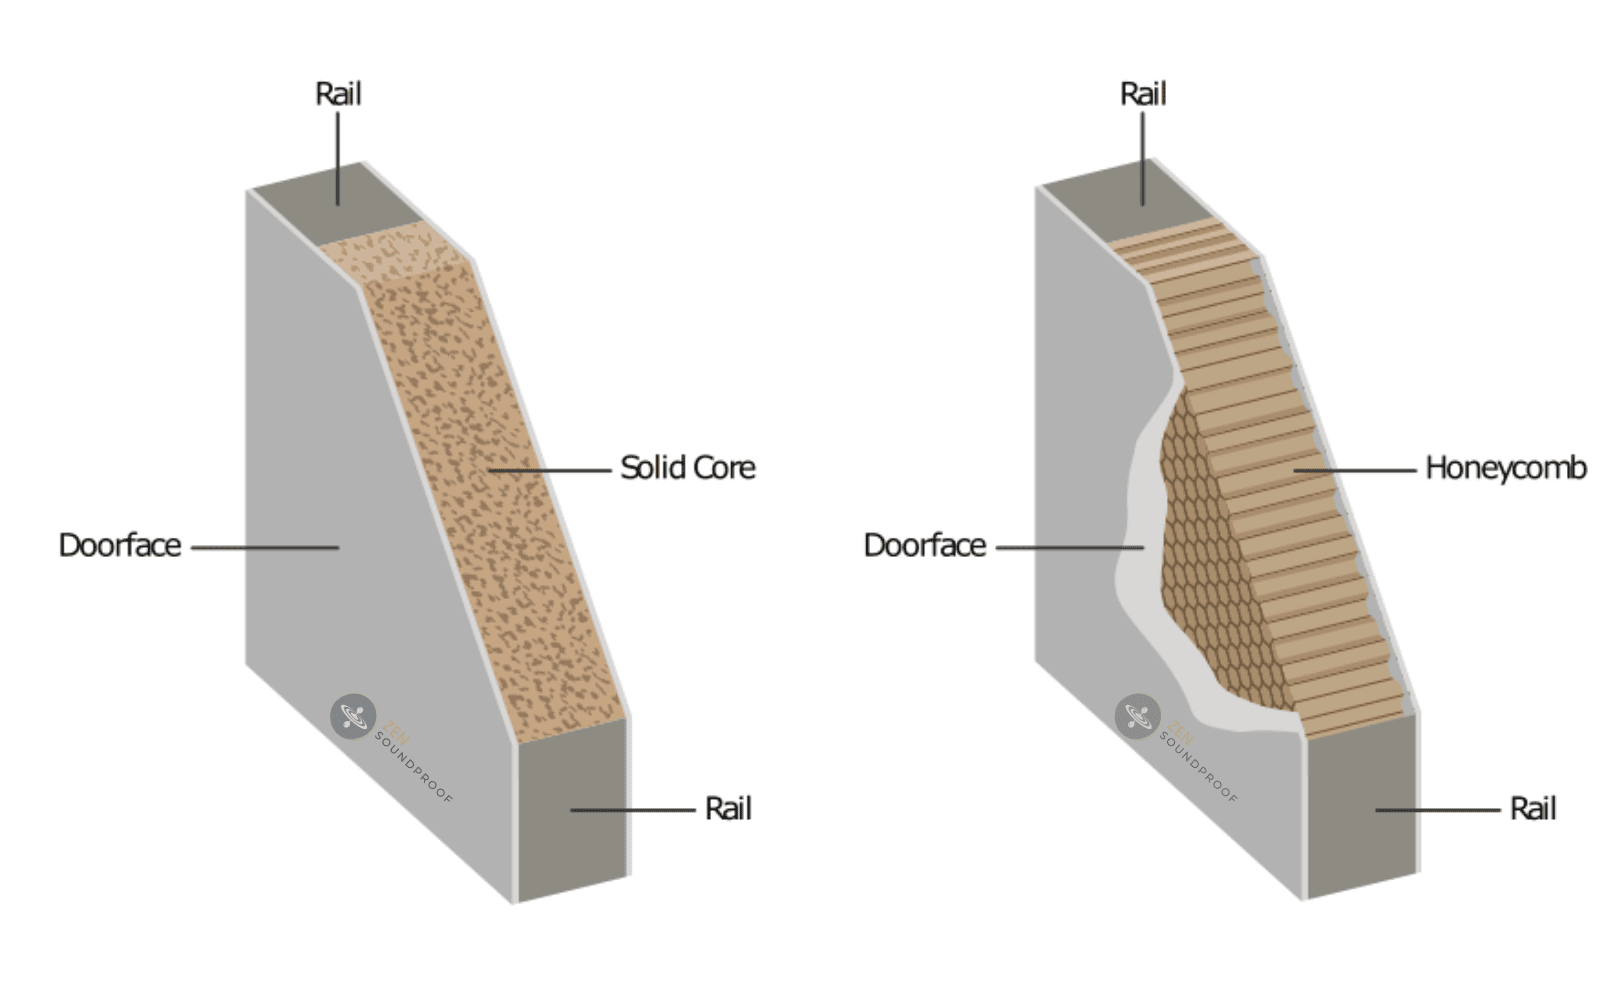 Illustration describing the difference between a solid core door and hollow core door filled with honeycomb